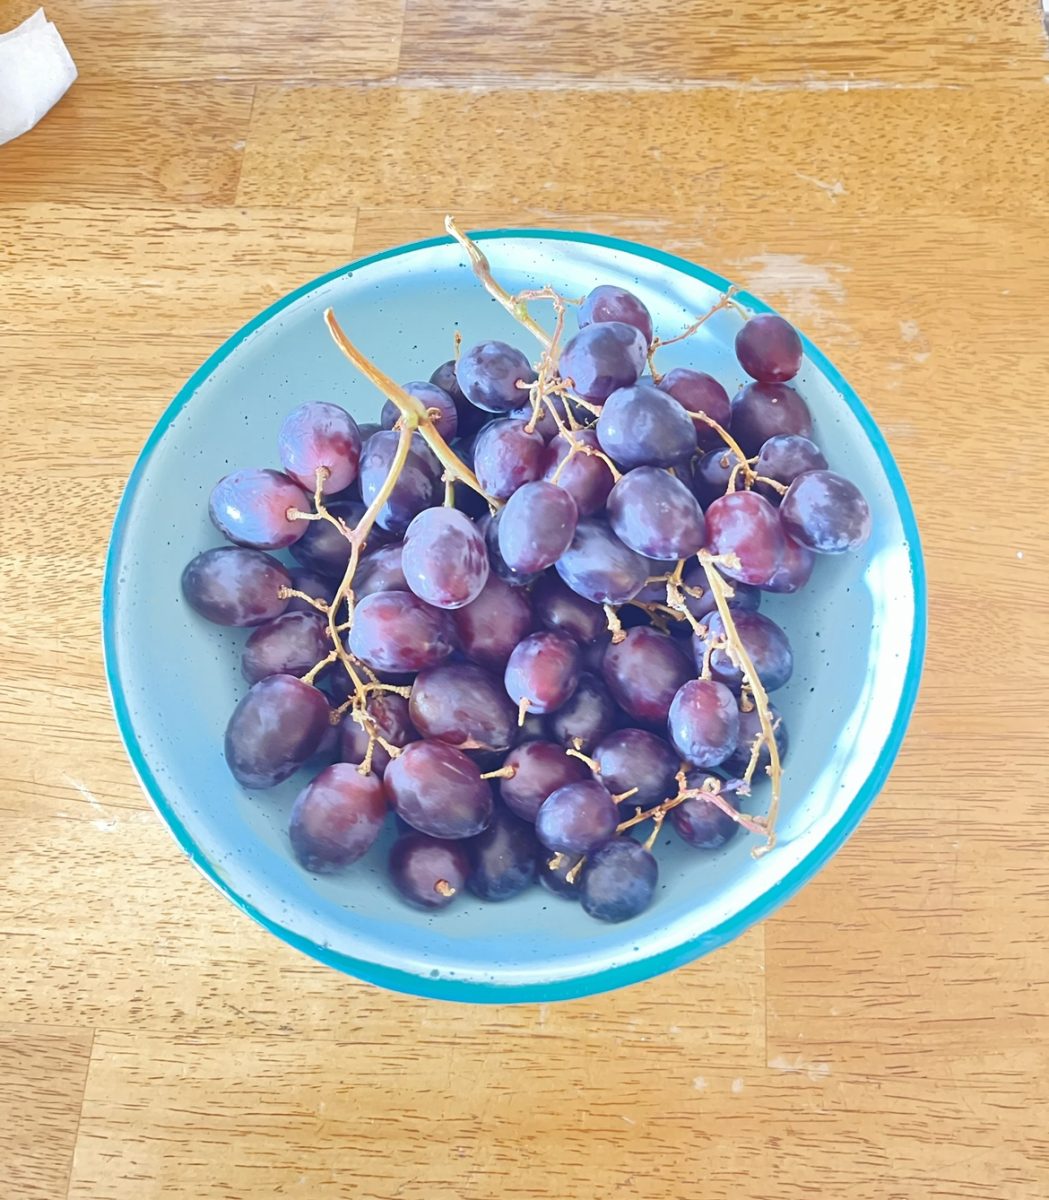 Grapes in a bowl. Looking beautiful.